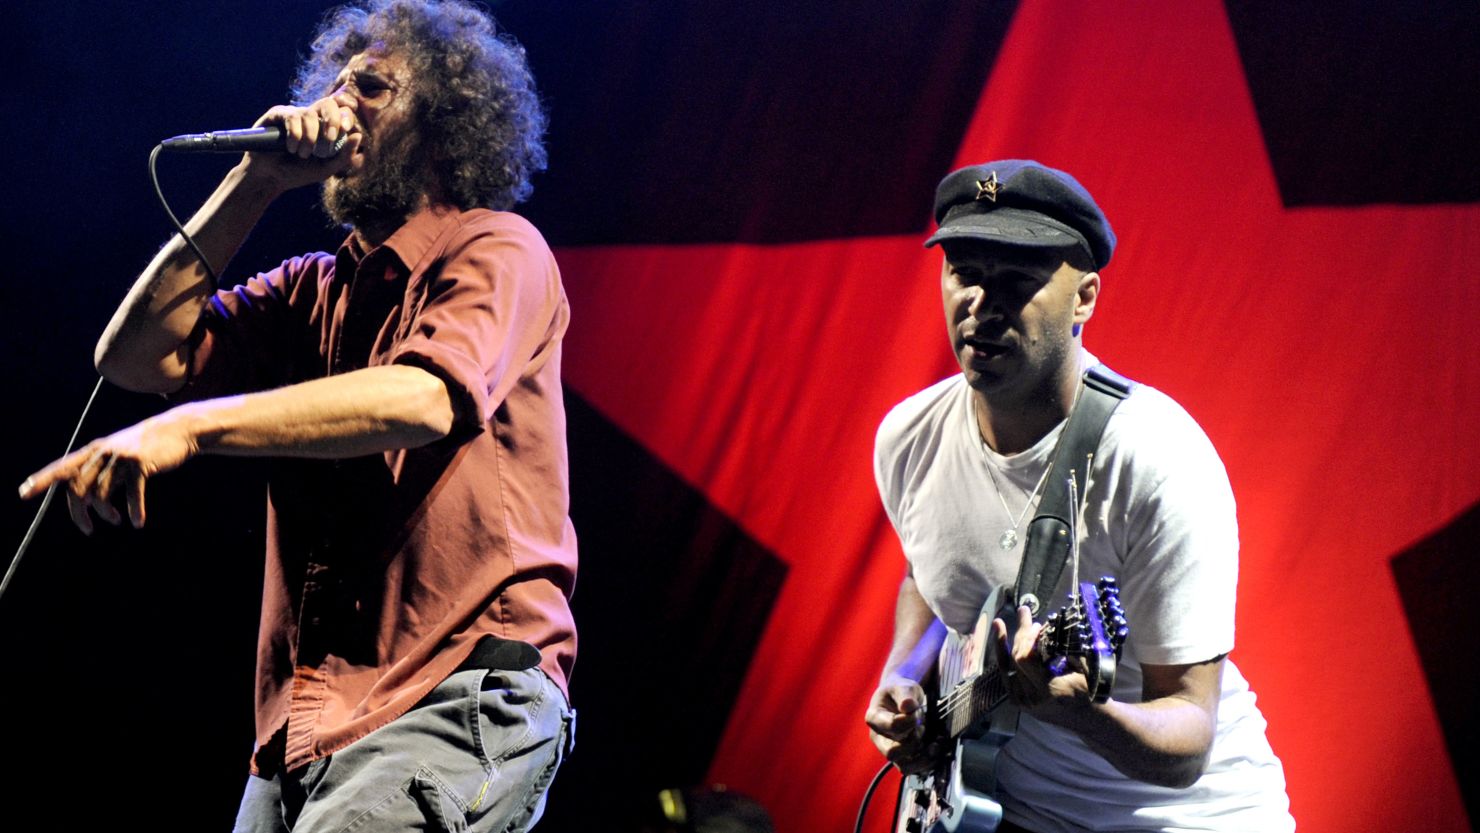 Rage Against the Machine called to abort the Supreme Court at their